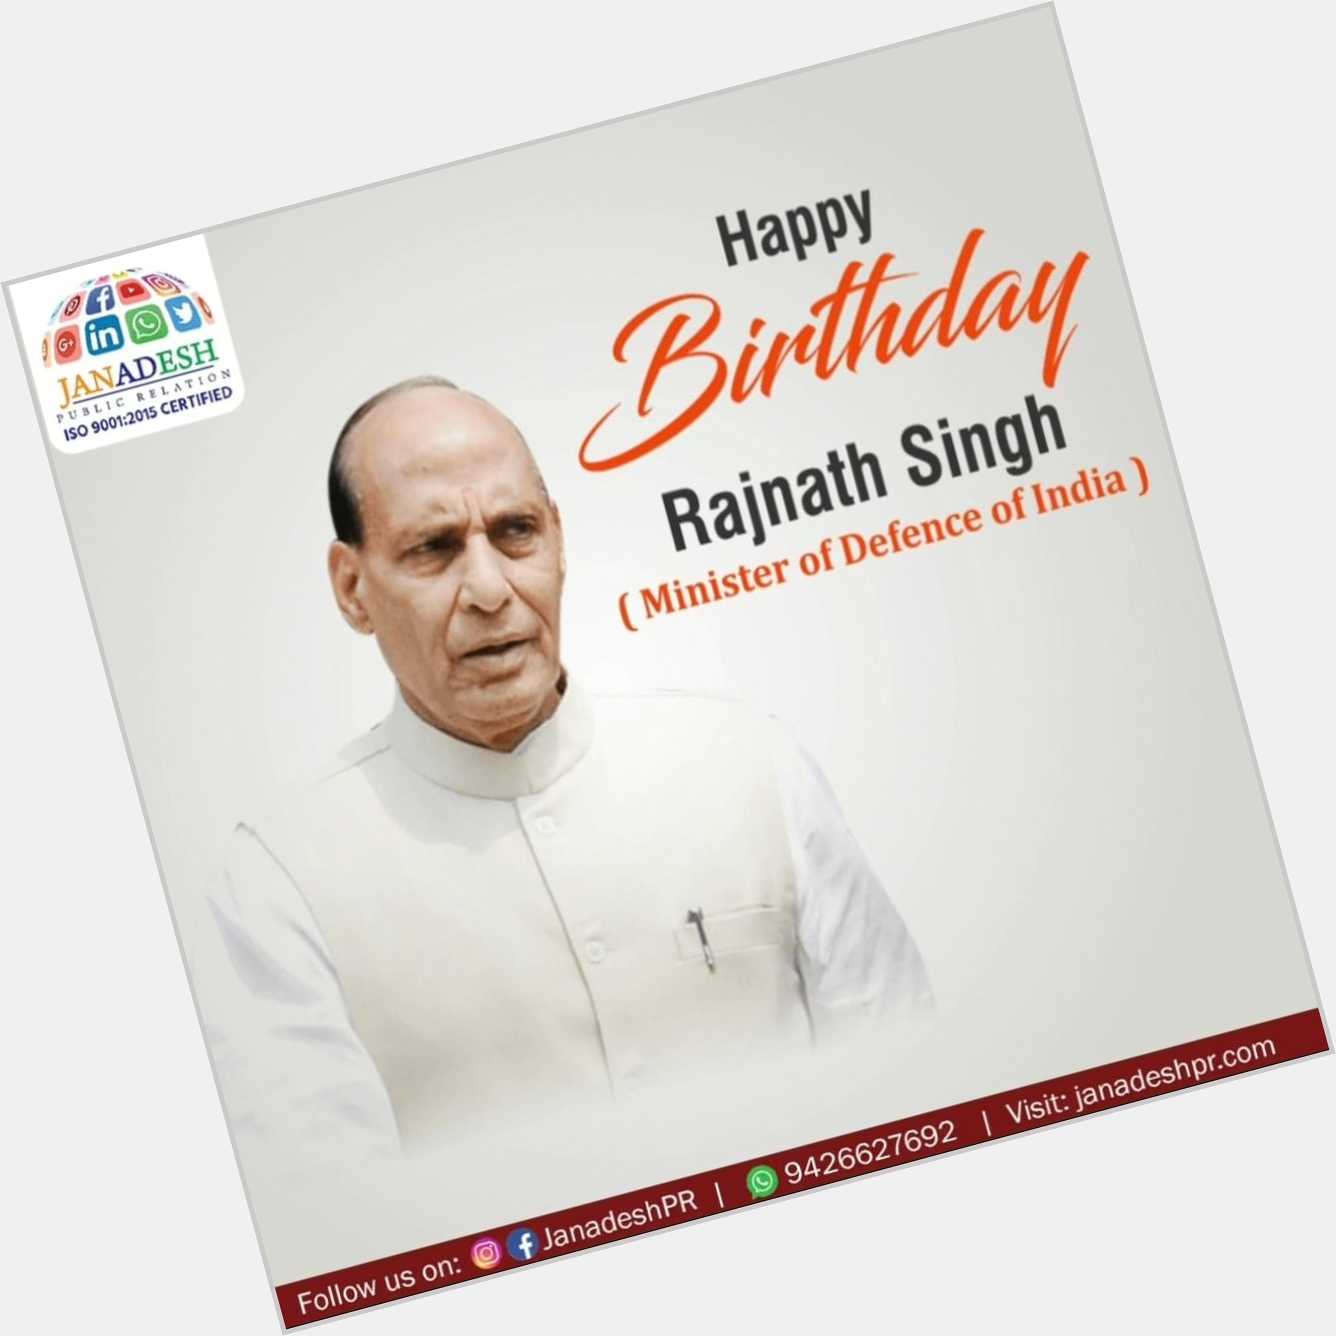 Happy Birthday To honorable Defences Minister of India
Shri Rajnath Singh 